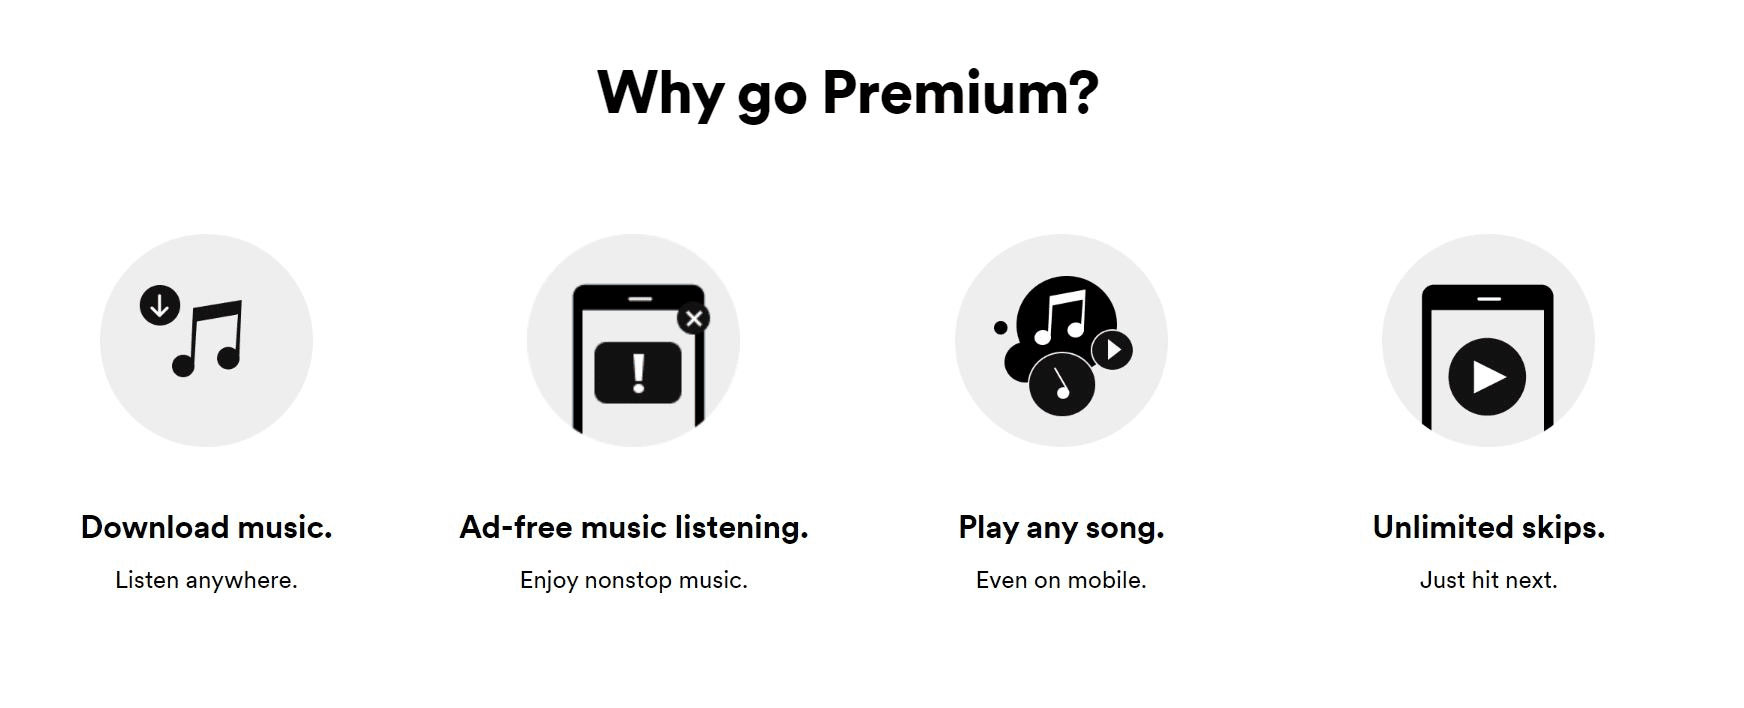 A Premium account on Spotify comes with many perks!